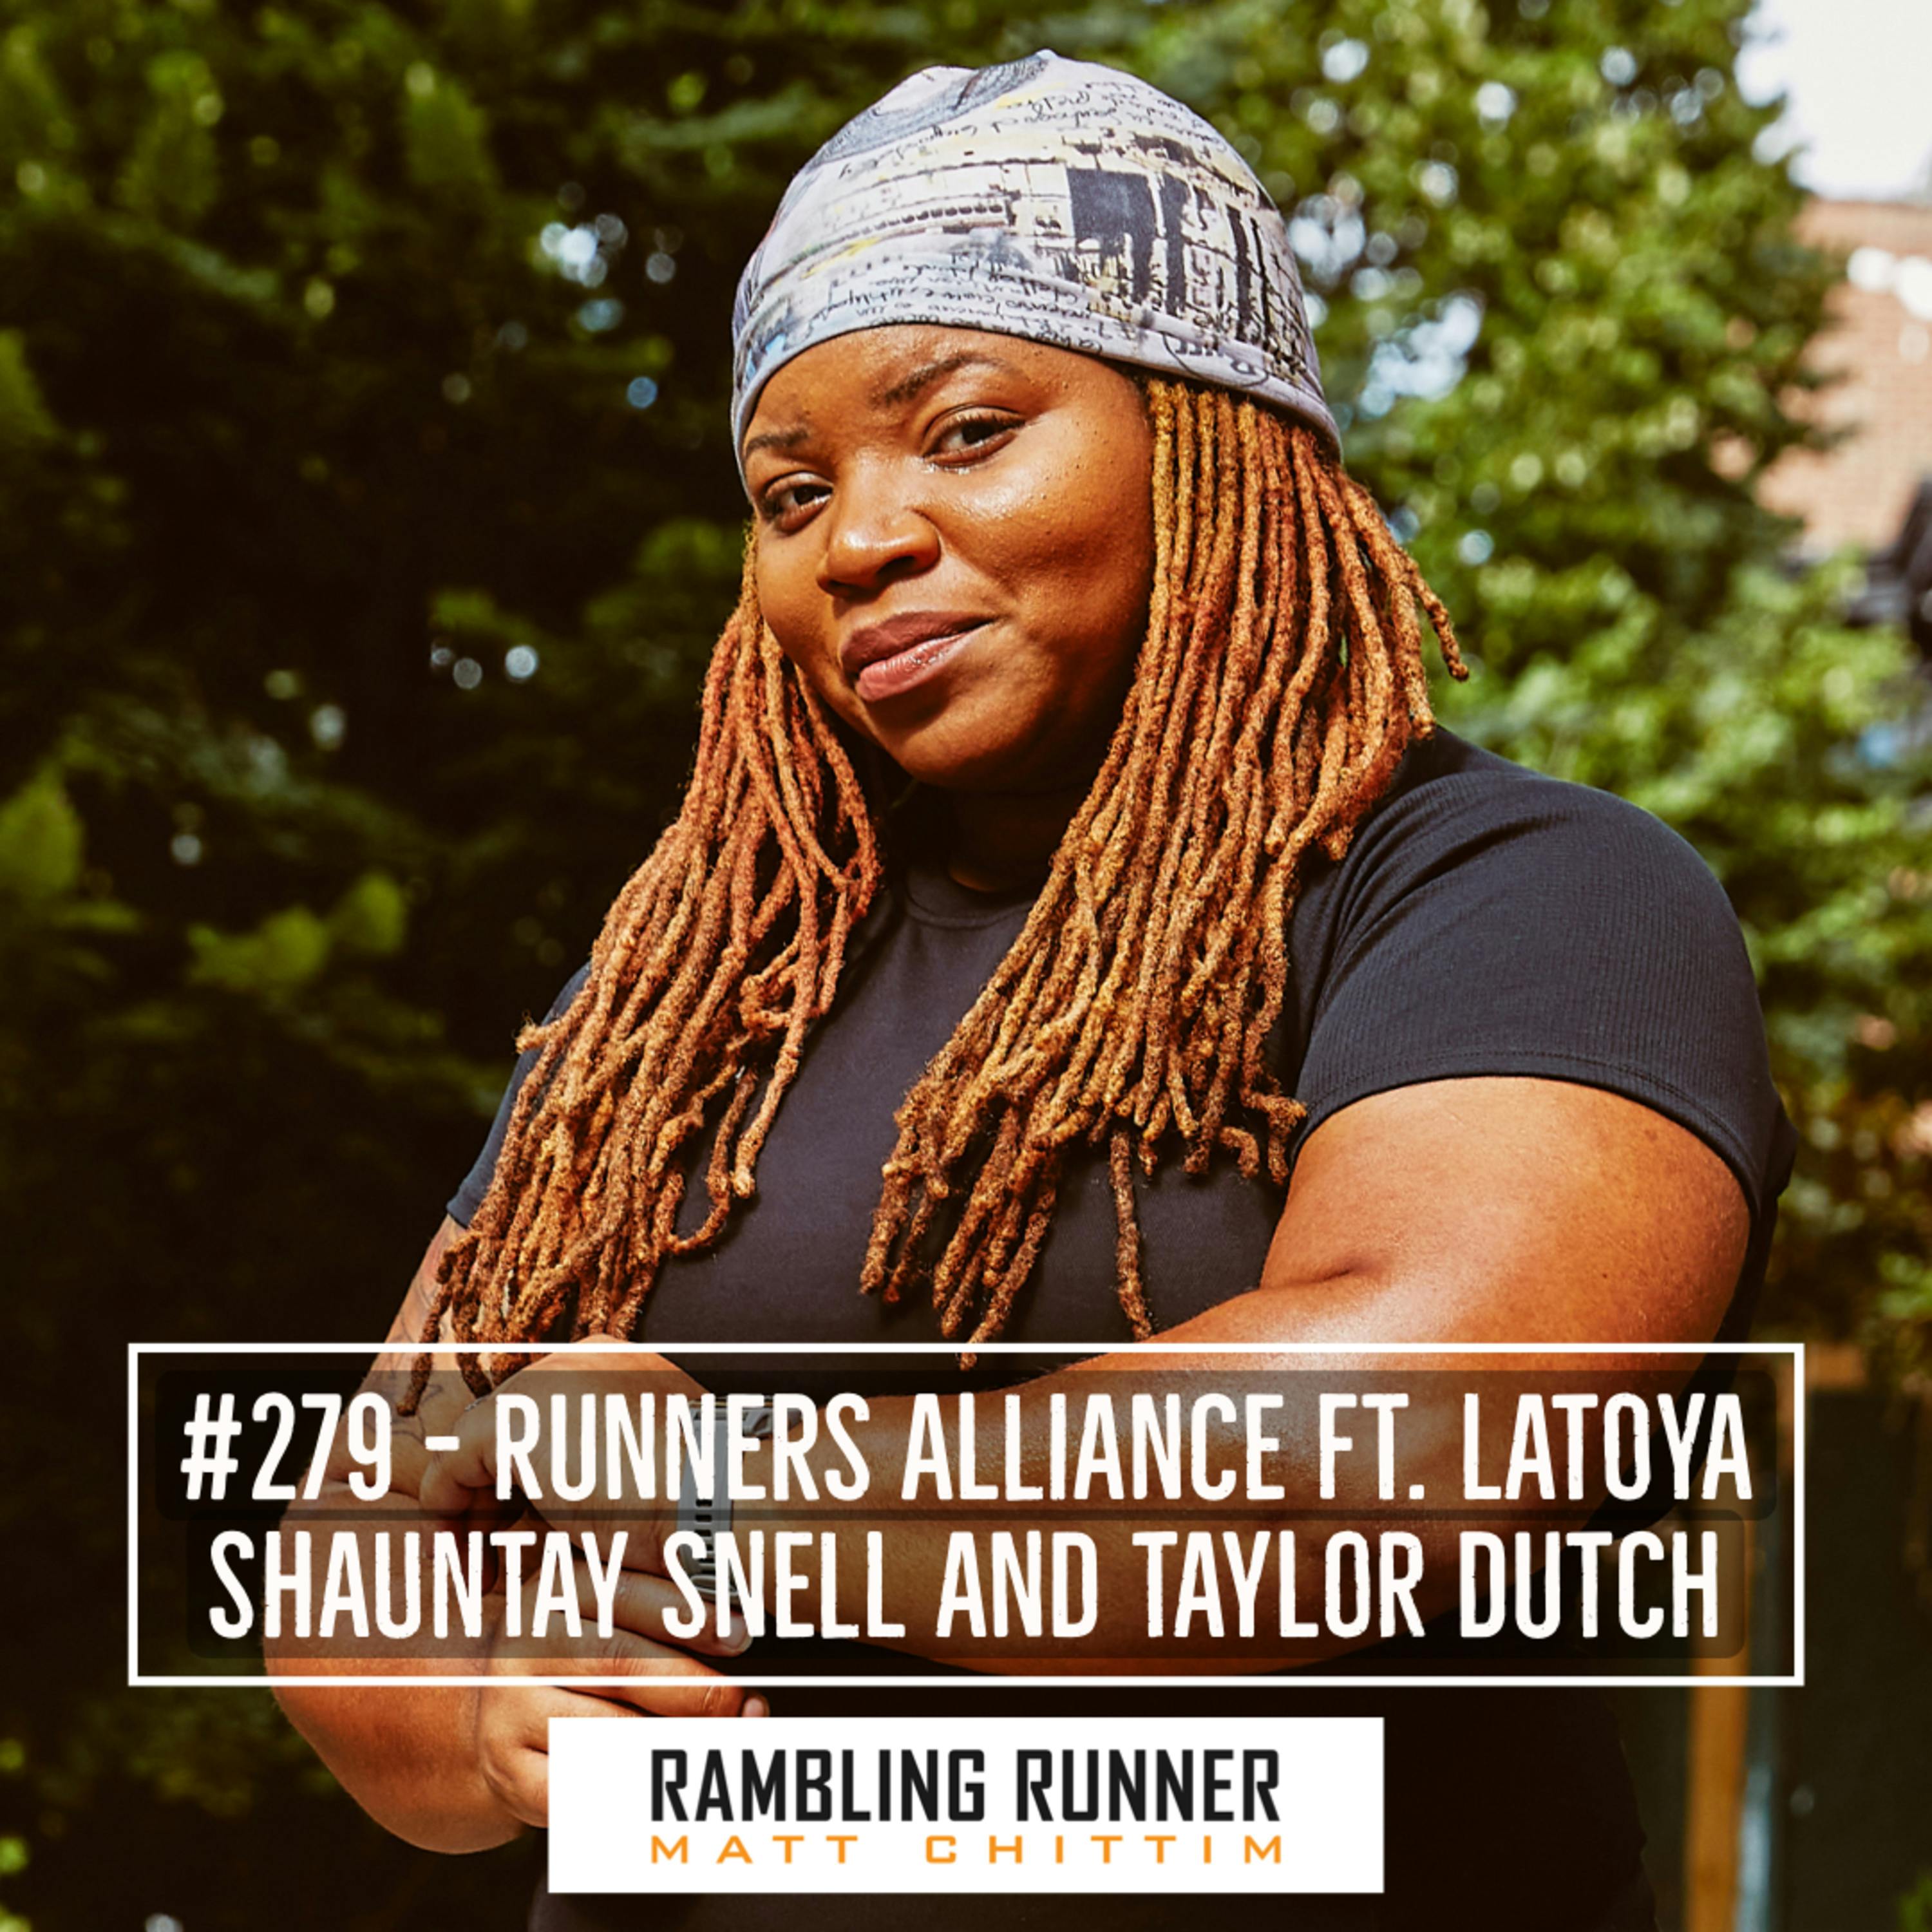 #279 - Runners Alliance ft. Latoya Shauntay Snell and Taylor Dutch